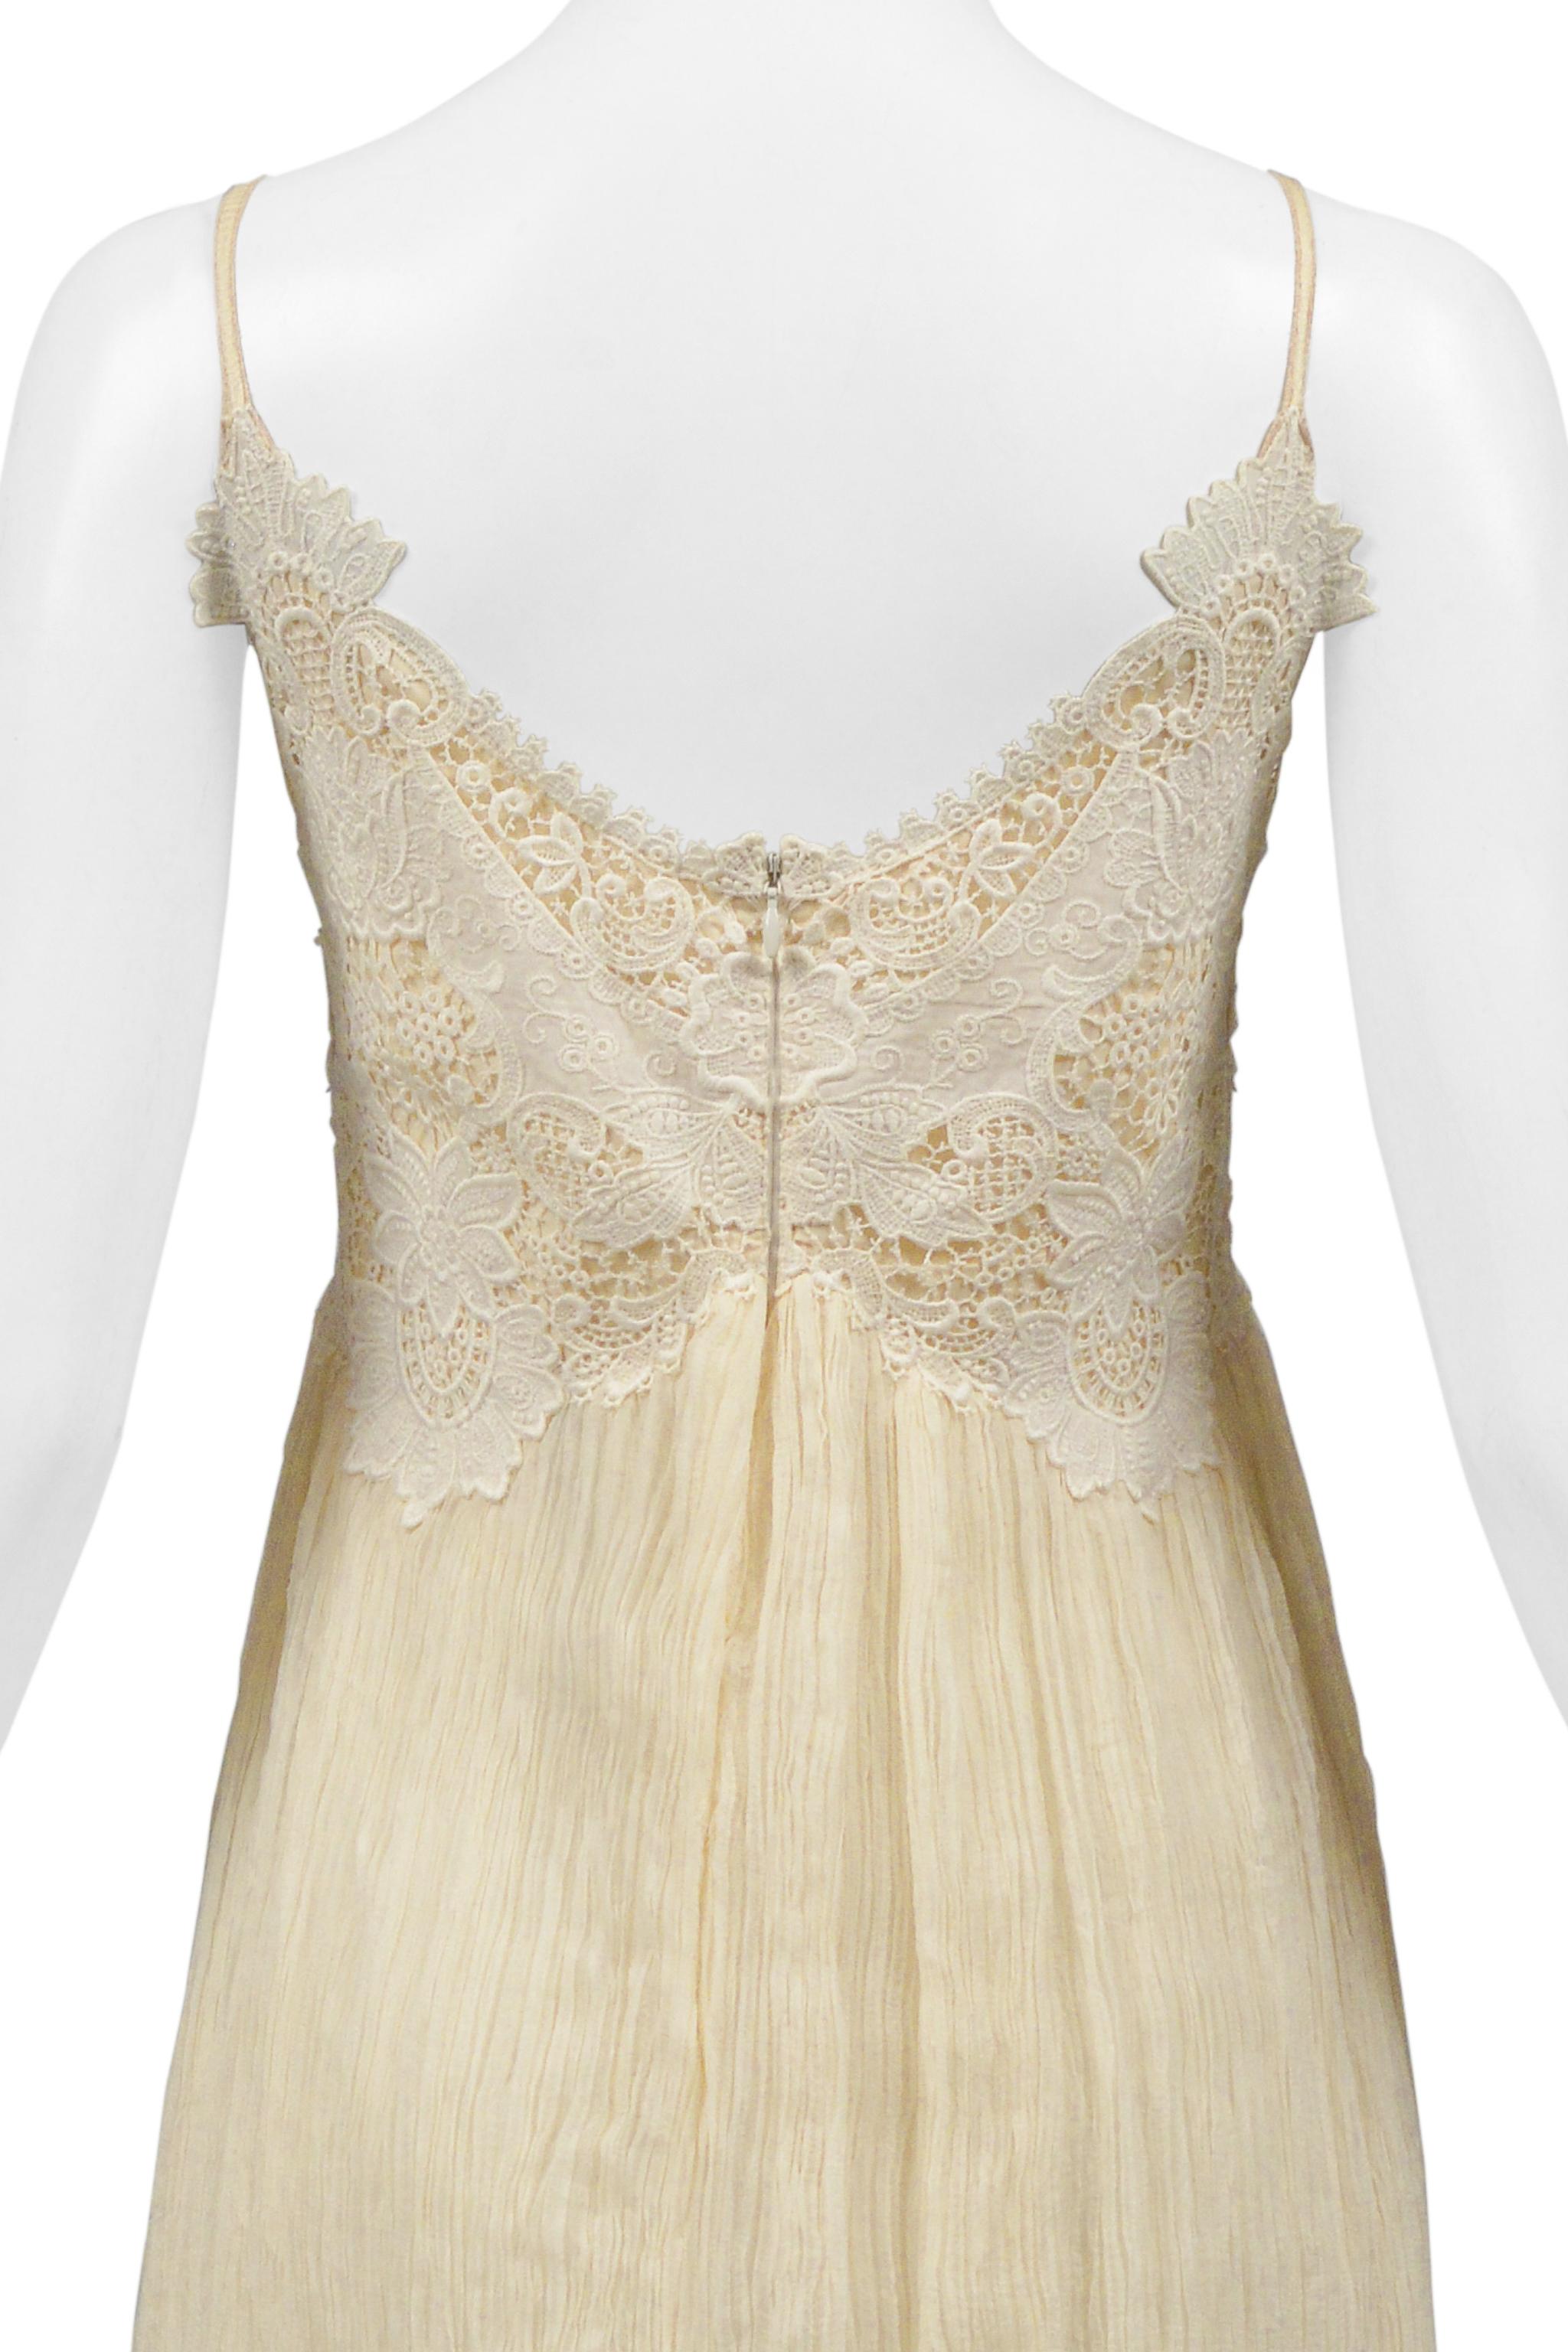 Alexander McQueen Off White Crinkle Dress W Lace Bodice 2005 In Excellent Condition For Sale In Los Angeles, CA